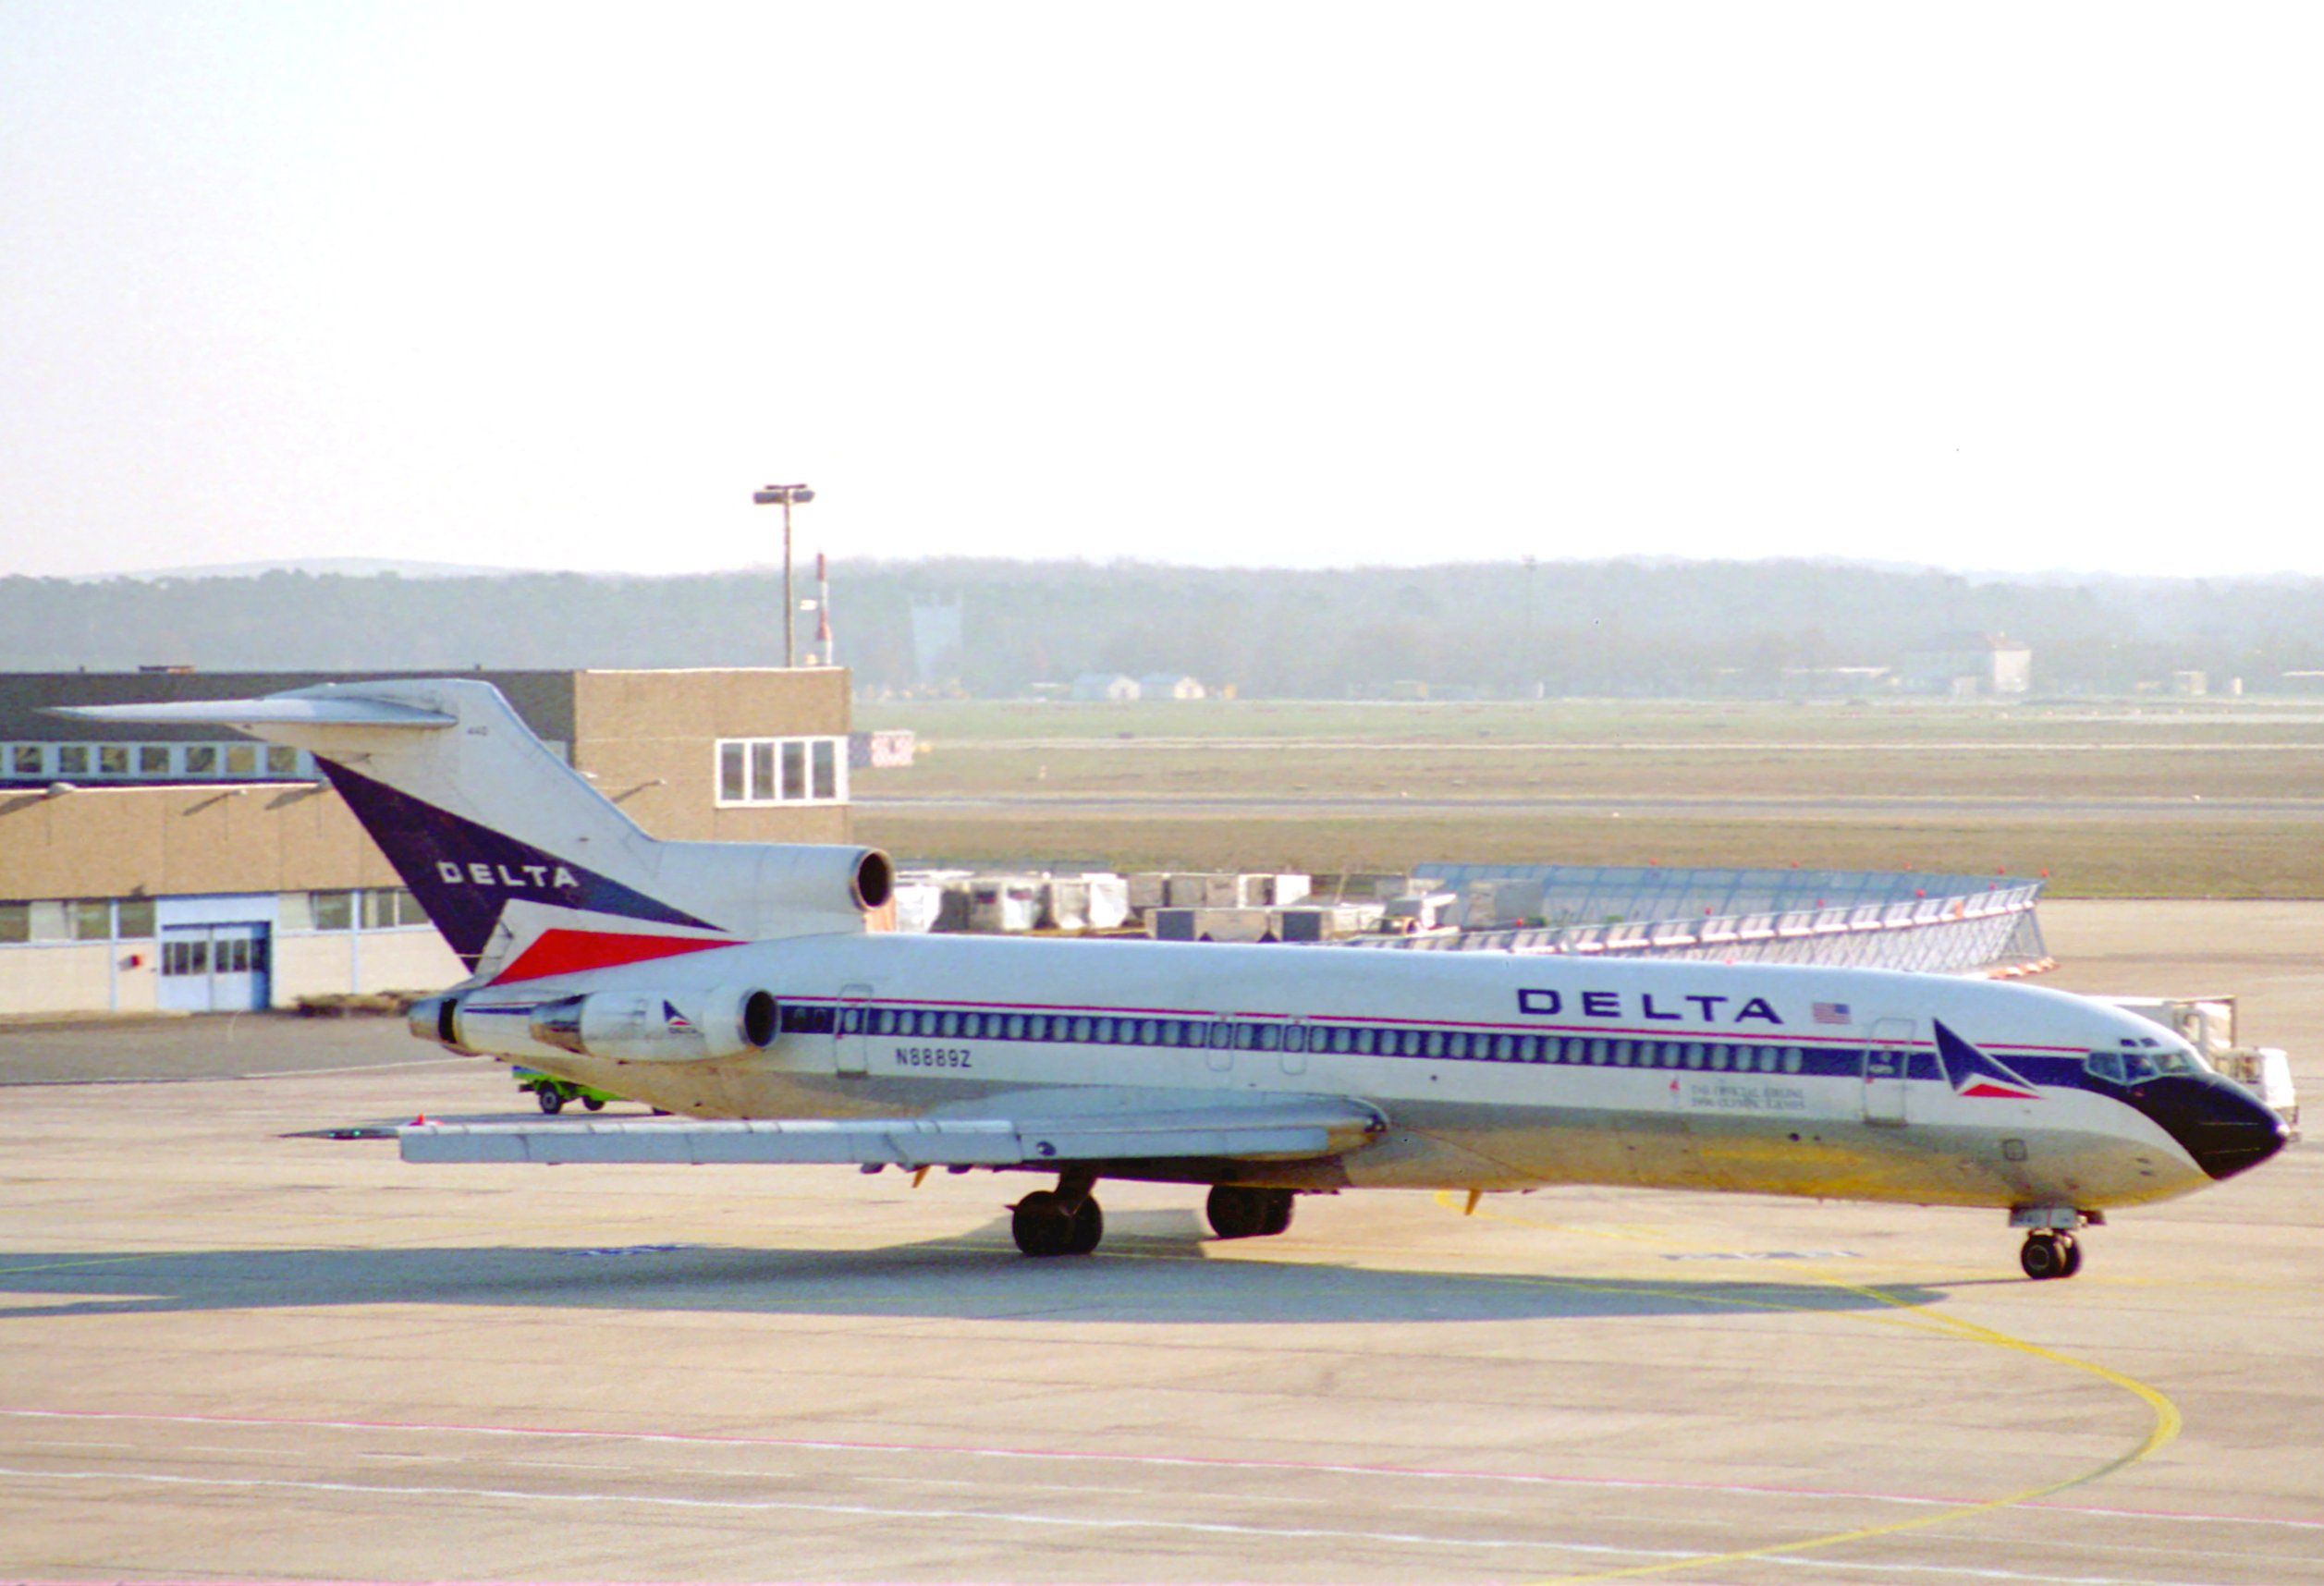 A Delta Air Lines Boeing 727 on an airport apron.